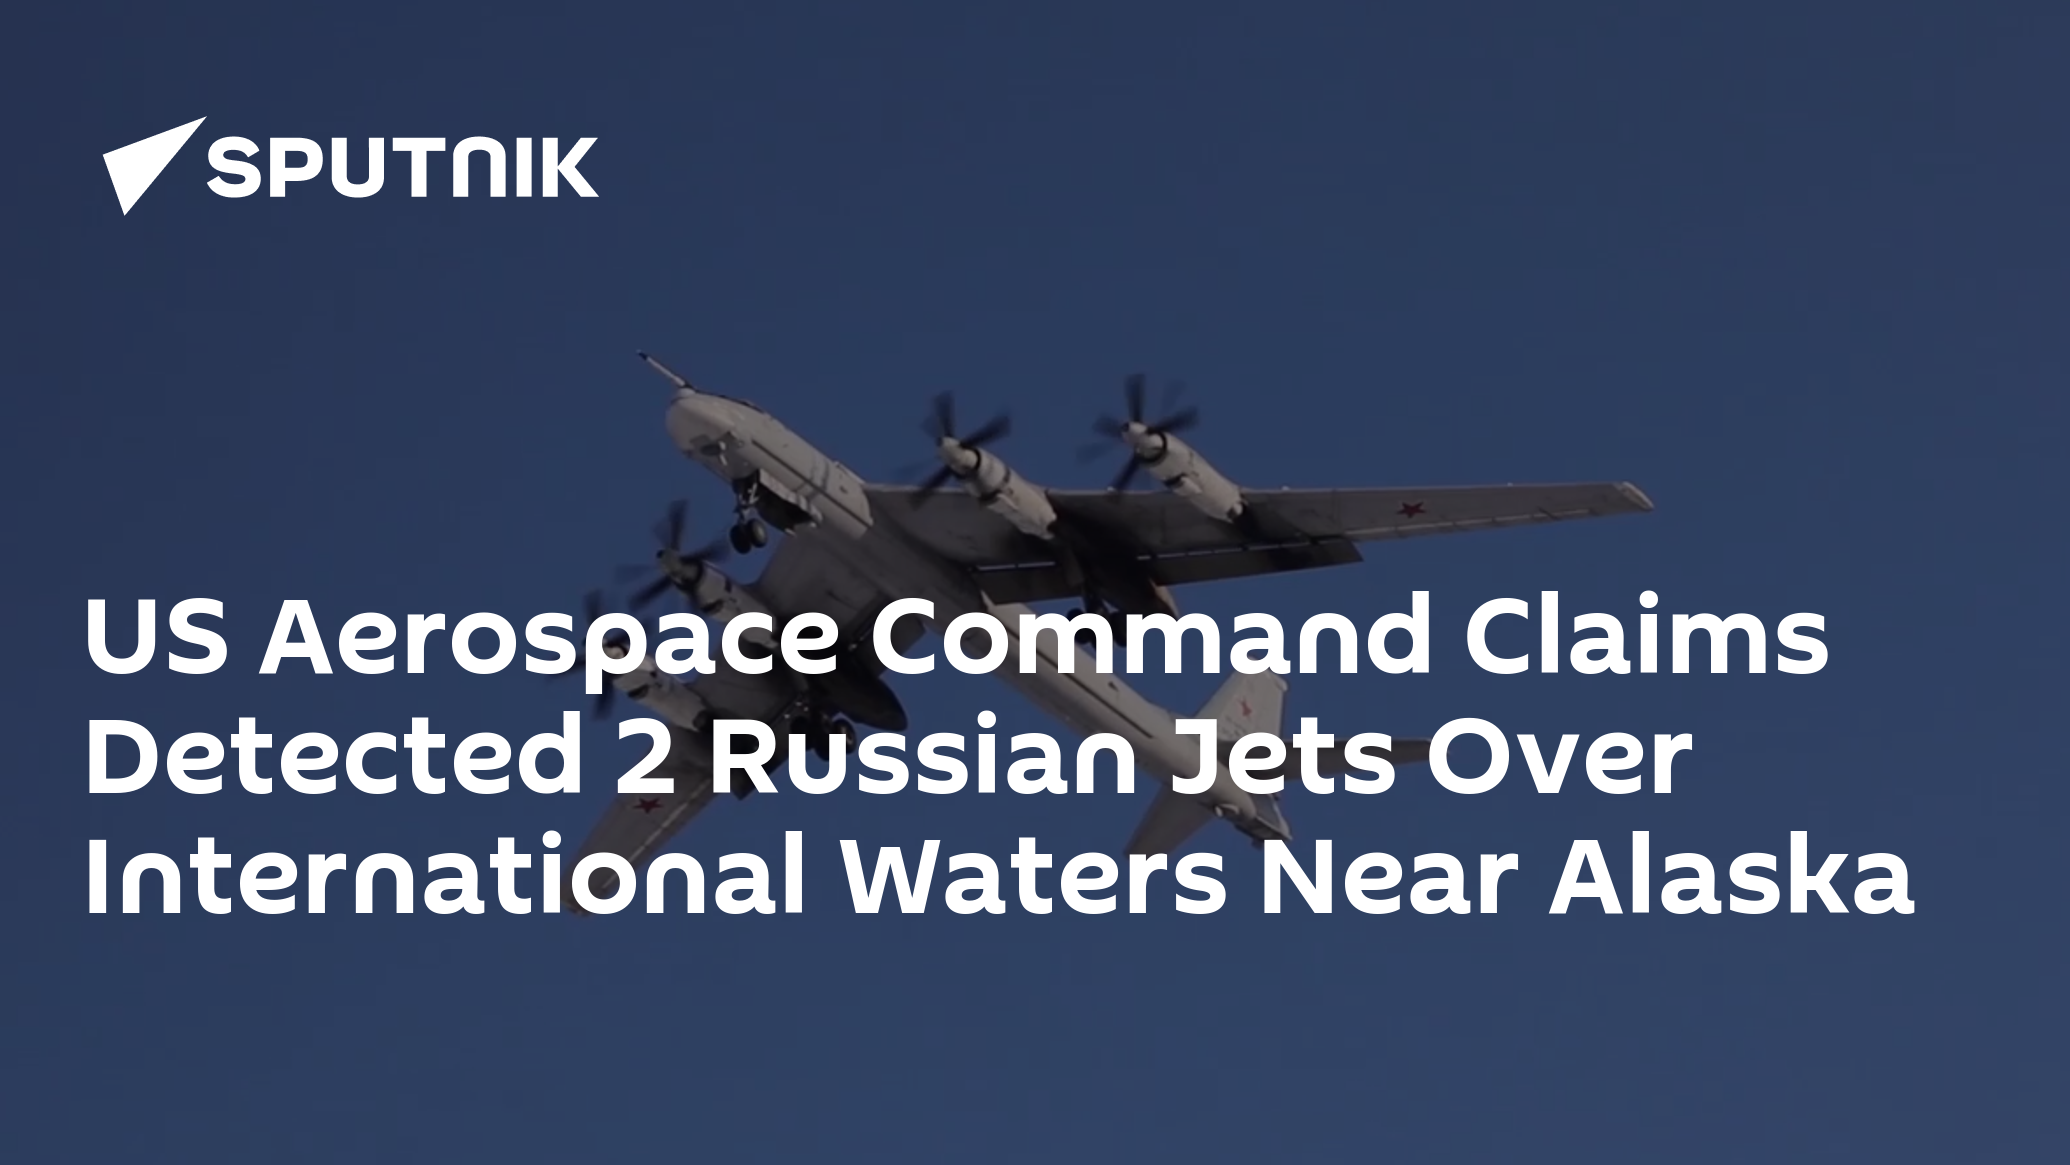 US Aerospace Command Claims Detected 2 Russian Jets Over International Waters Near Alaska